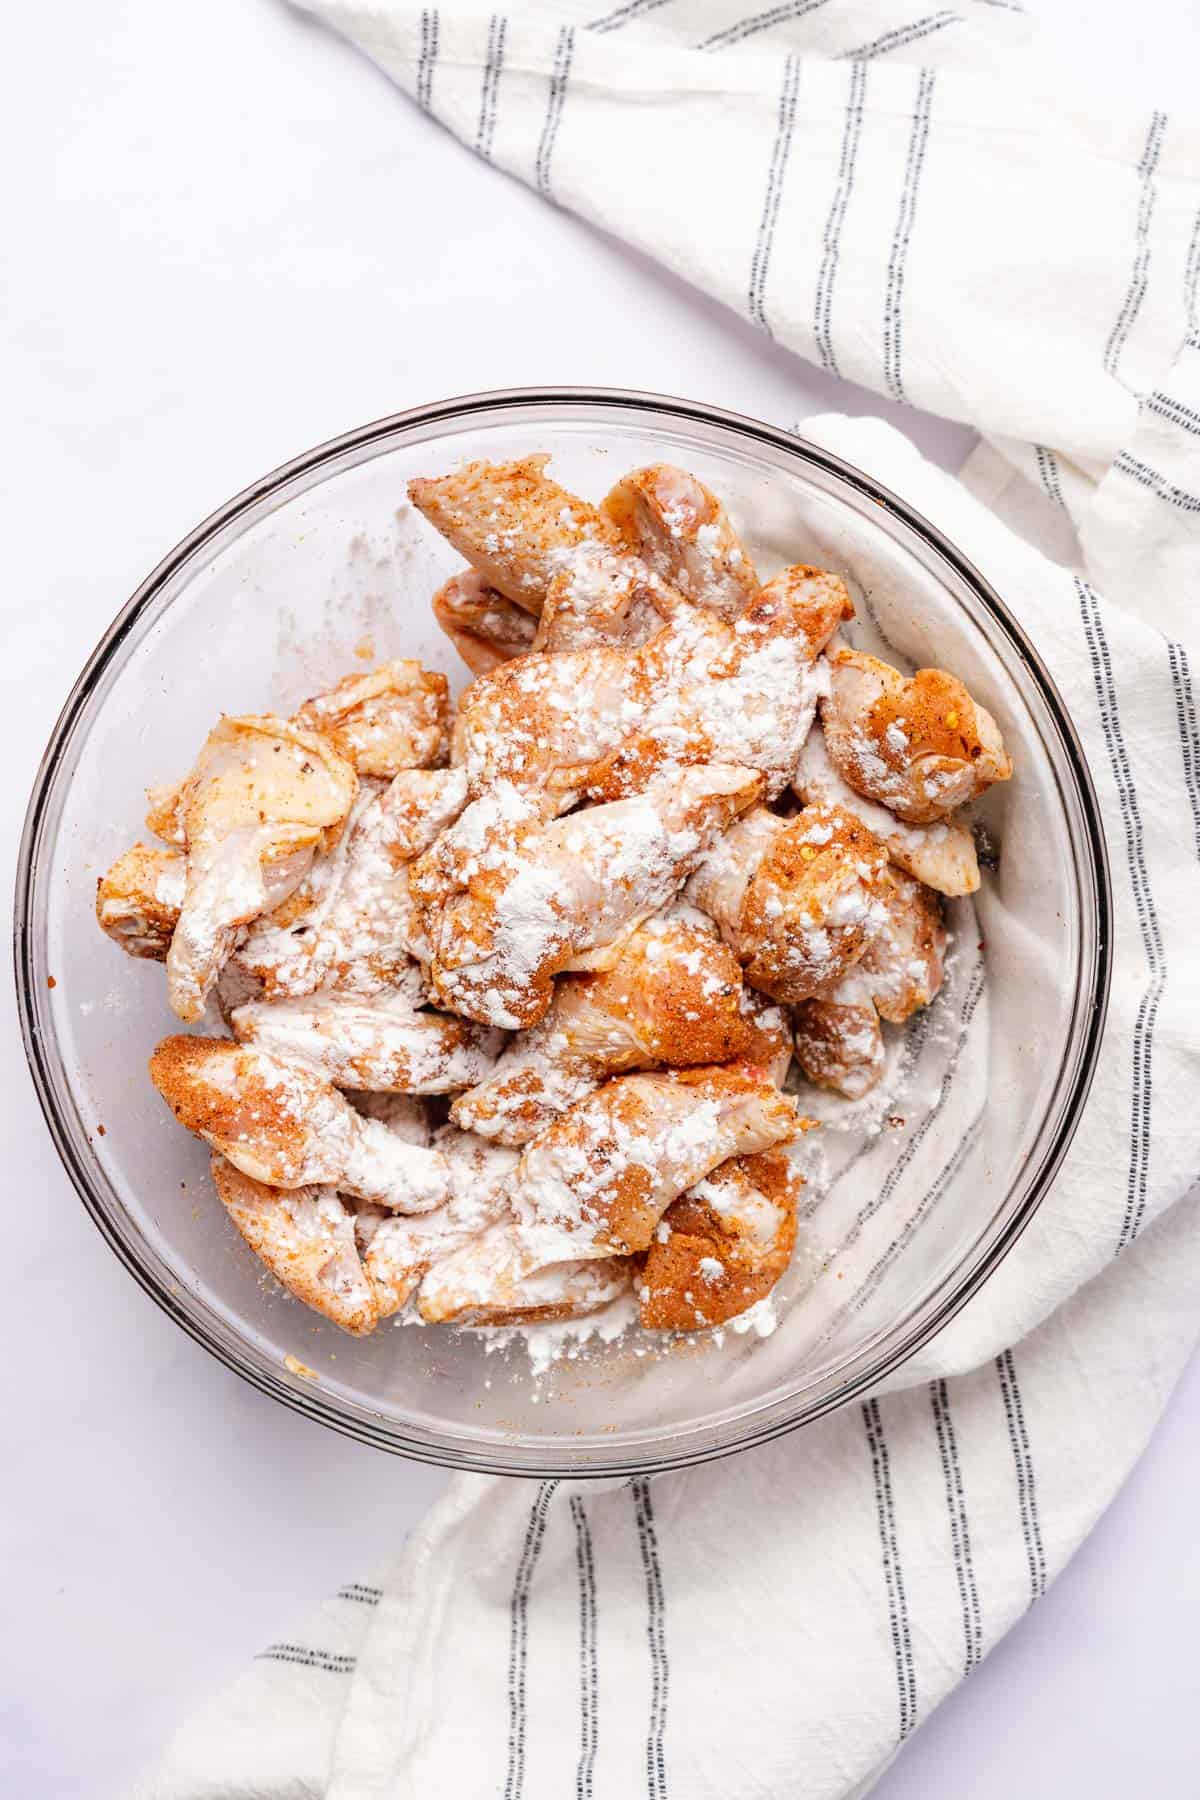 chicken wings in a bowl with baking powder